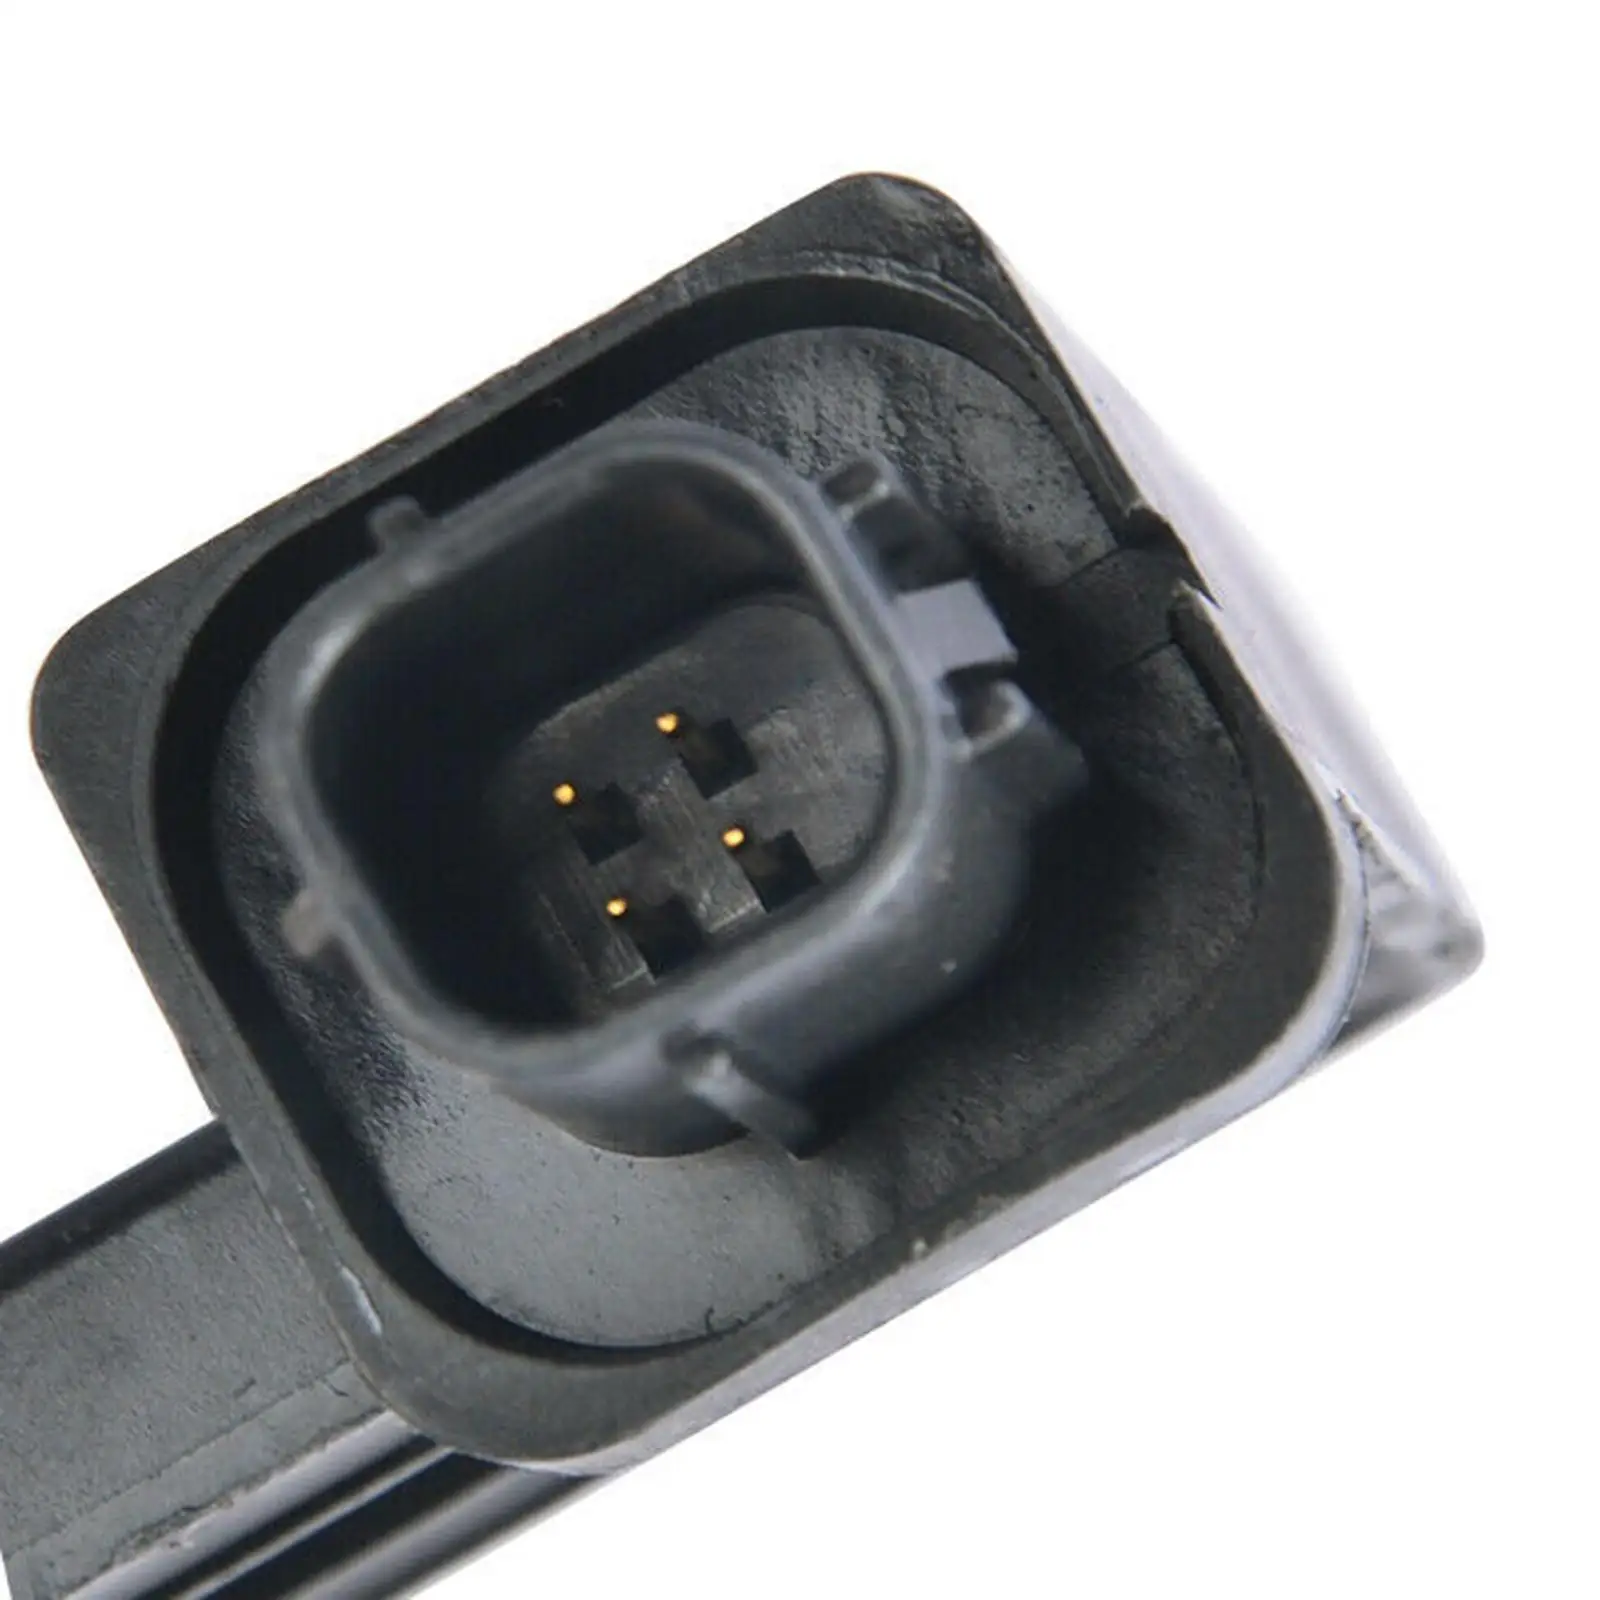 Battery Current Sensor 294G0-1HH0A, Fit for   2014, Replacement Spare  Easy to Install